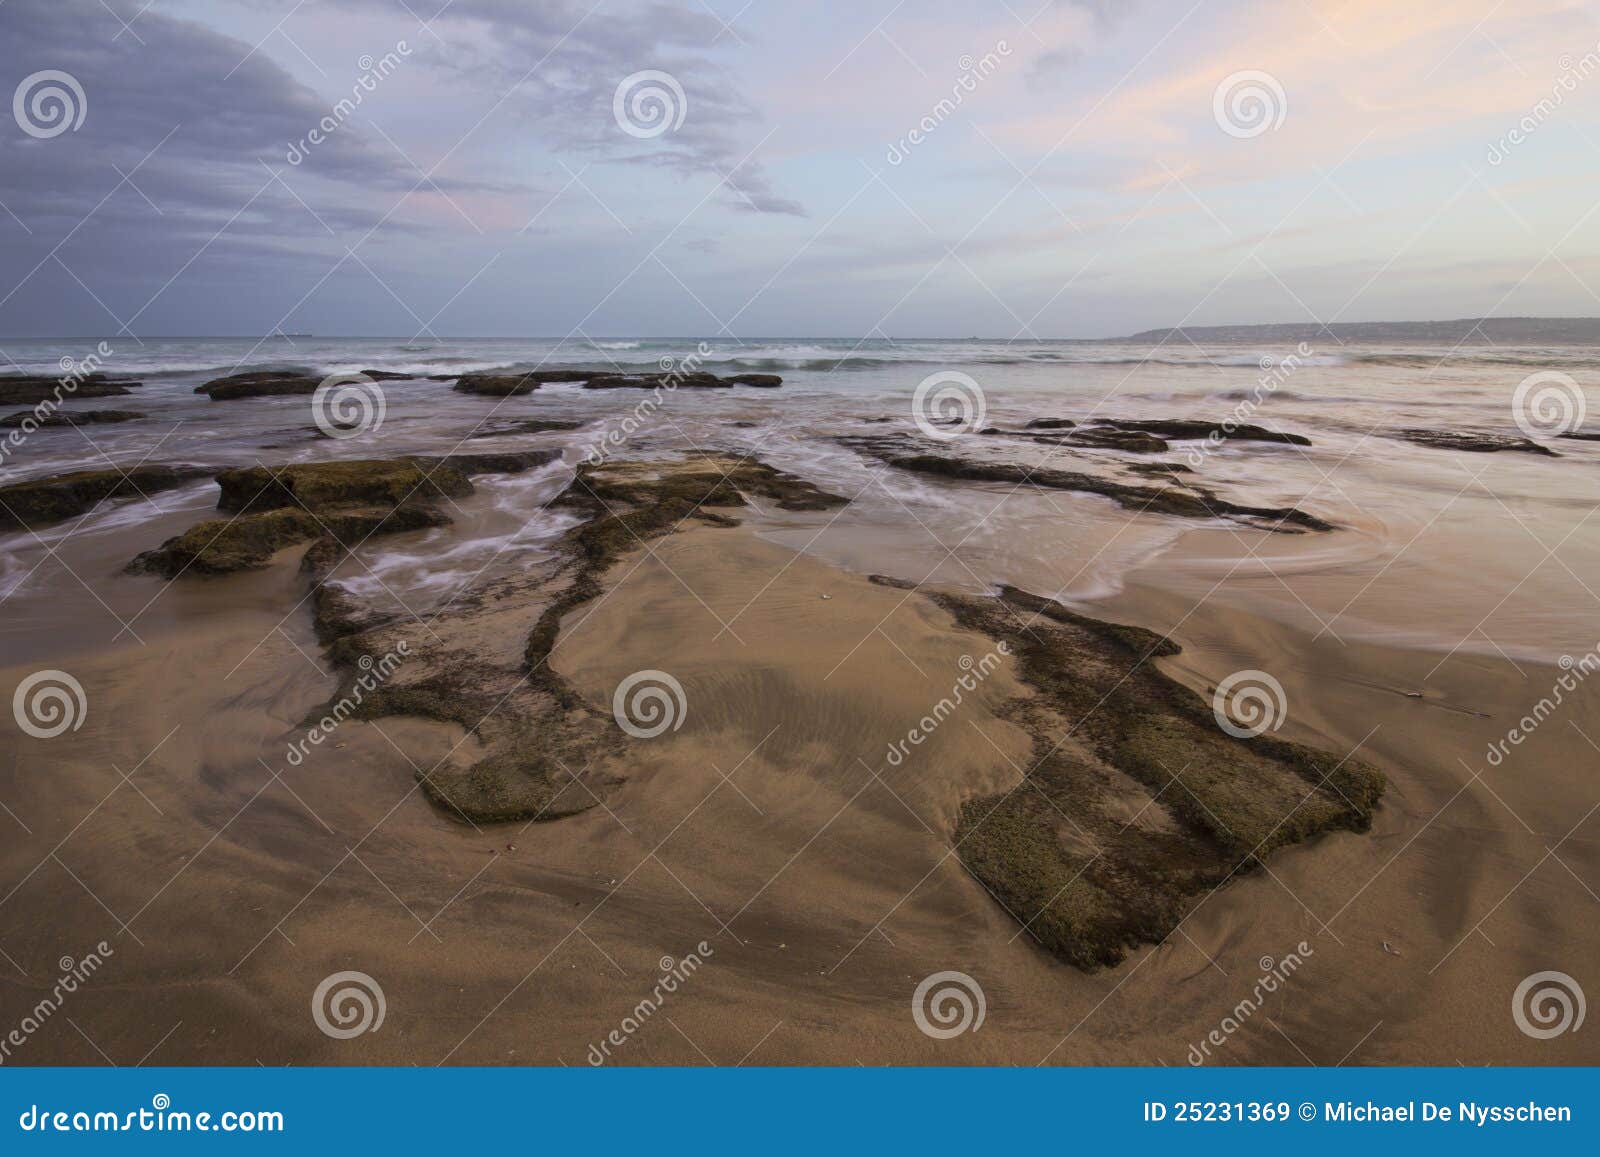 Exposed Rocks and Sunset with Rushing Water Stock Image - Image of calm